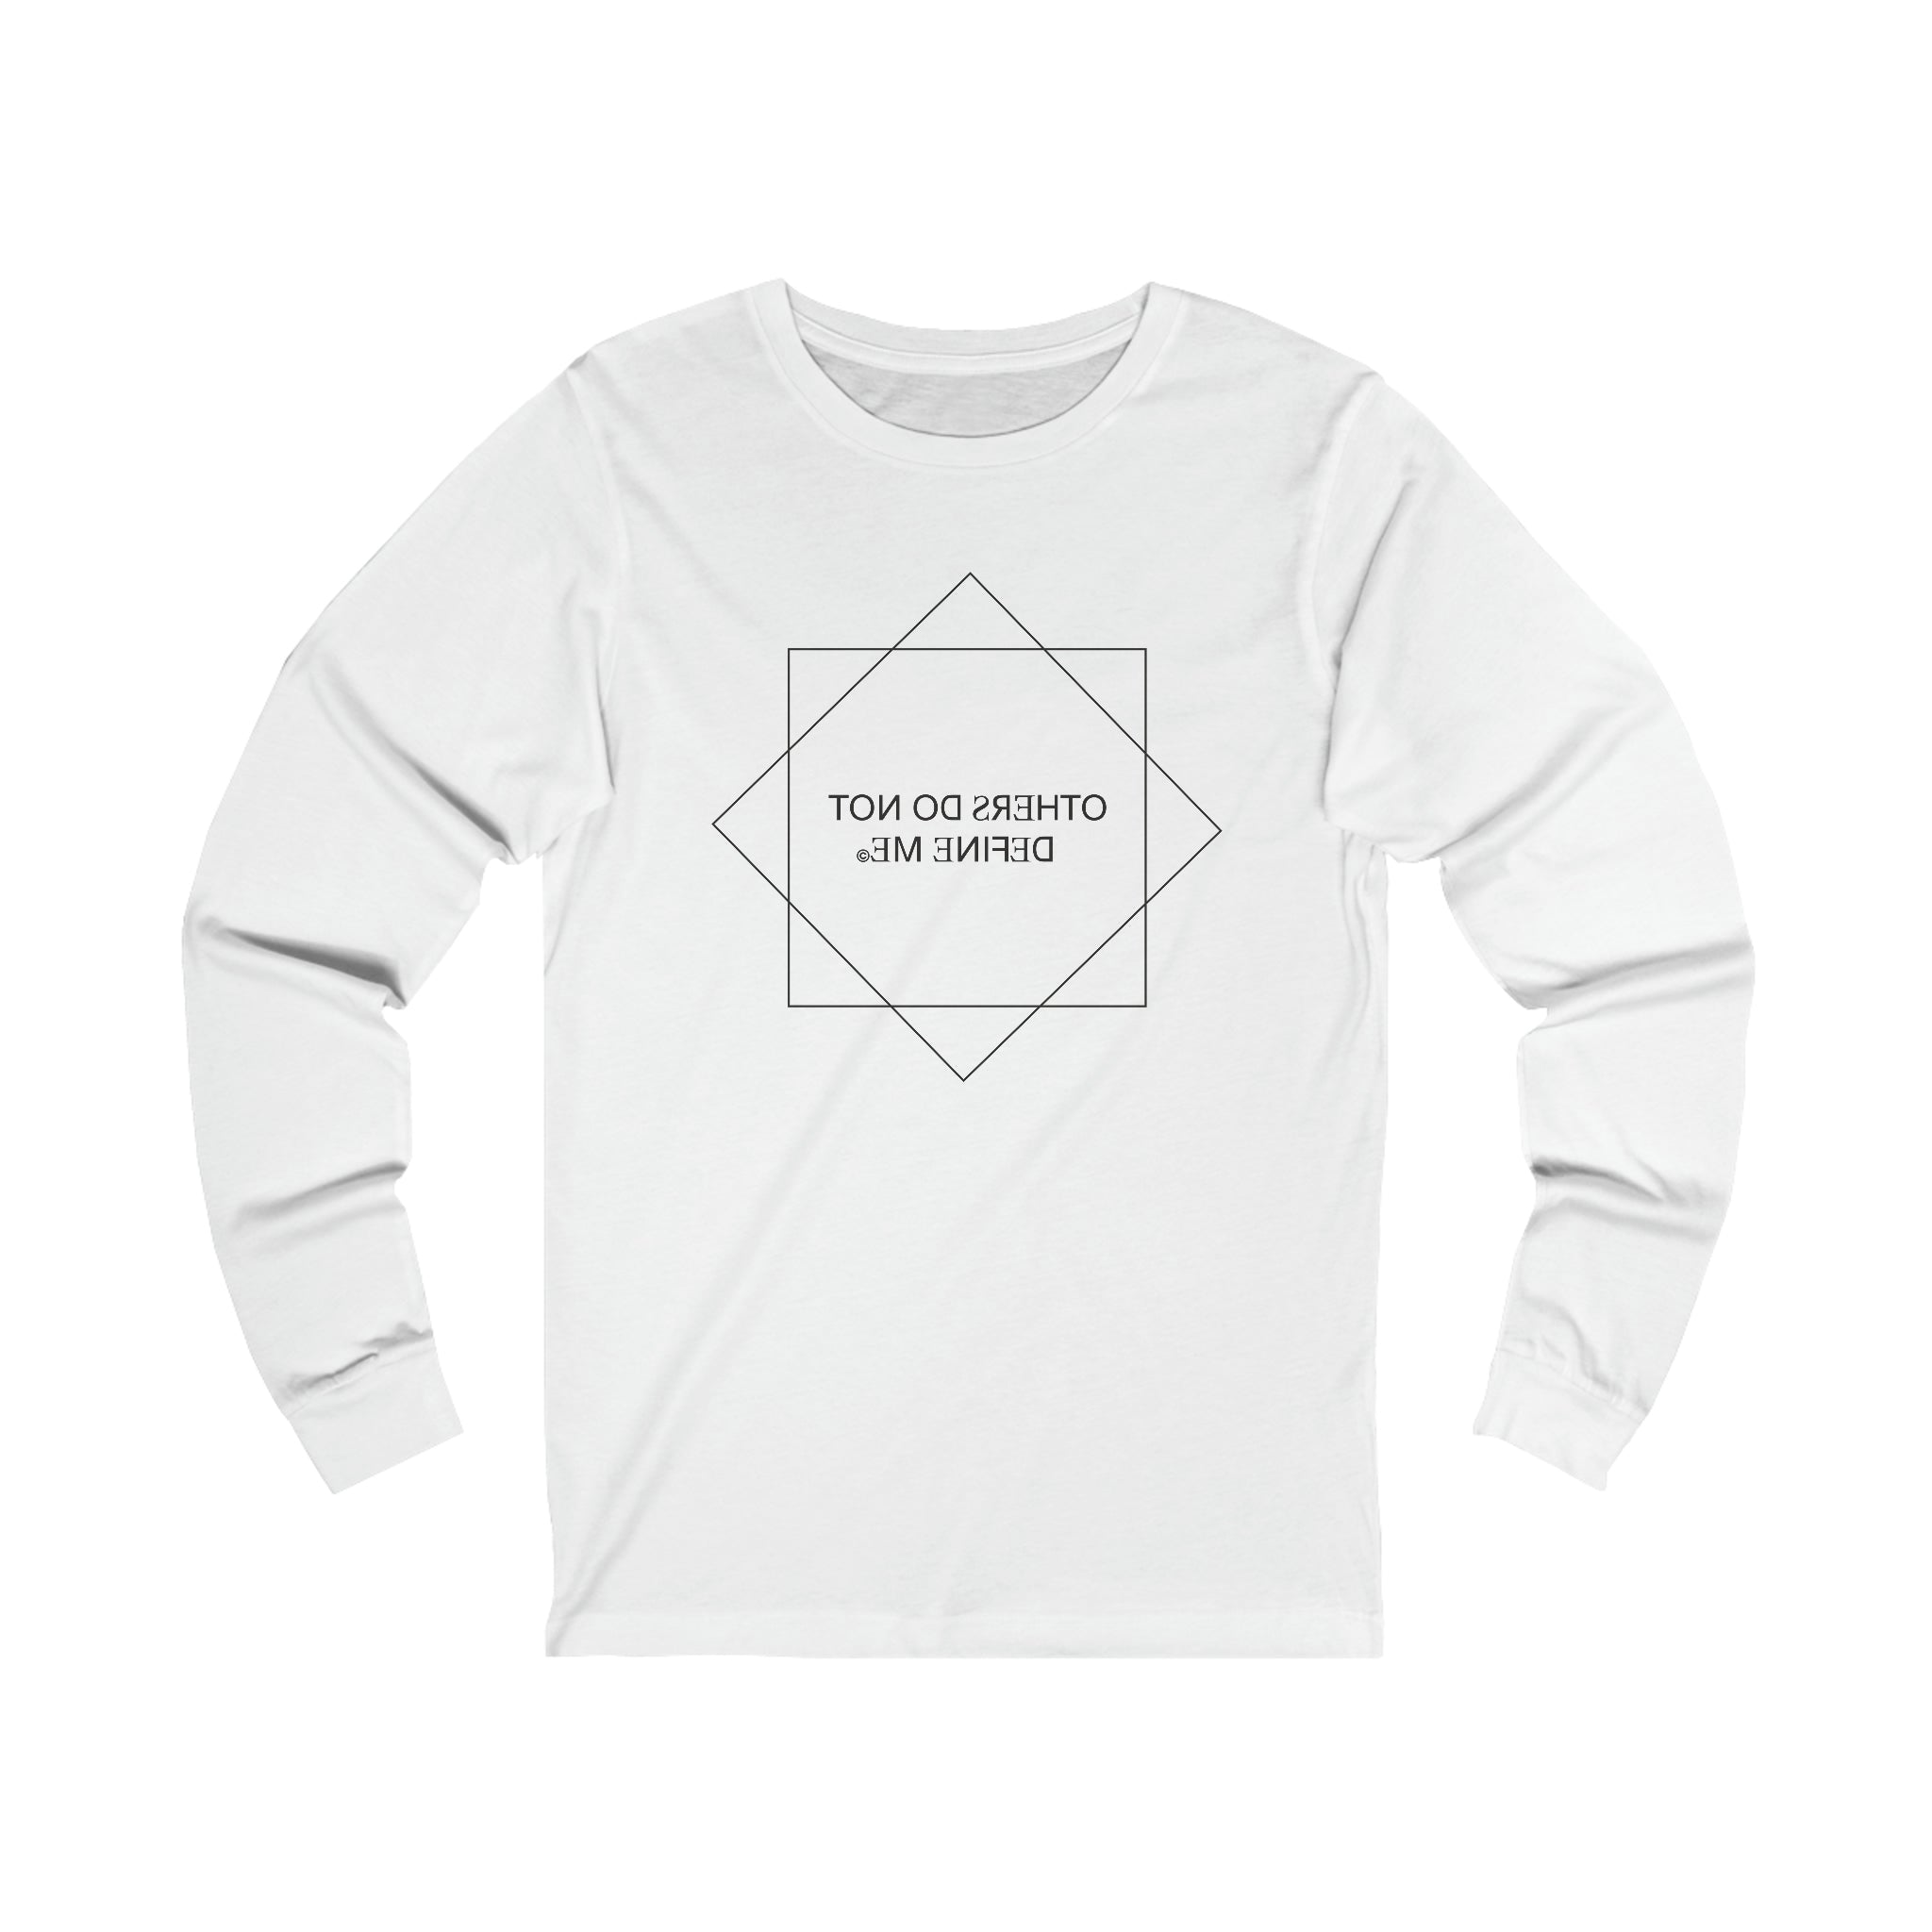 "Others Do Not Define Me" Women's Long Sleeve Tee